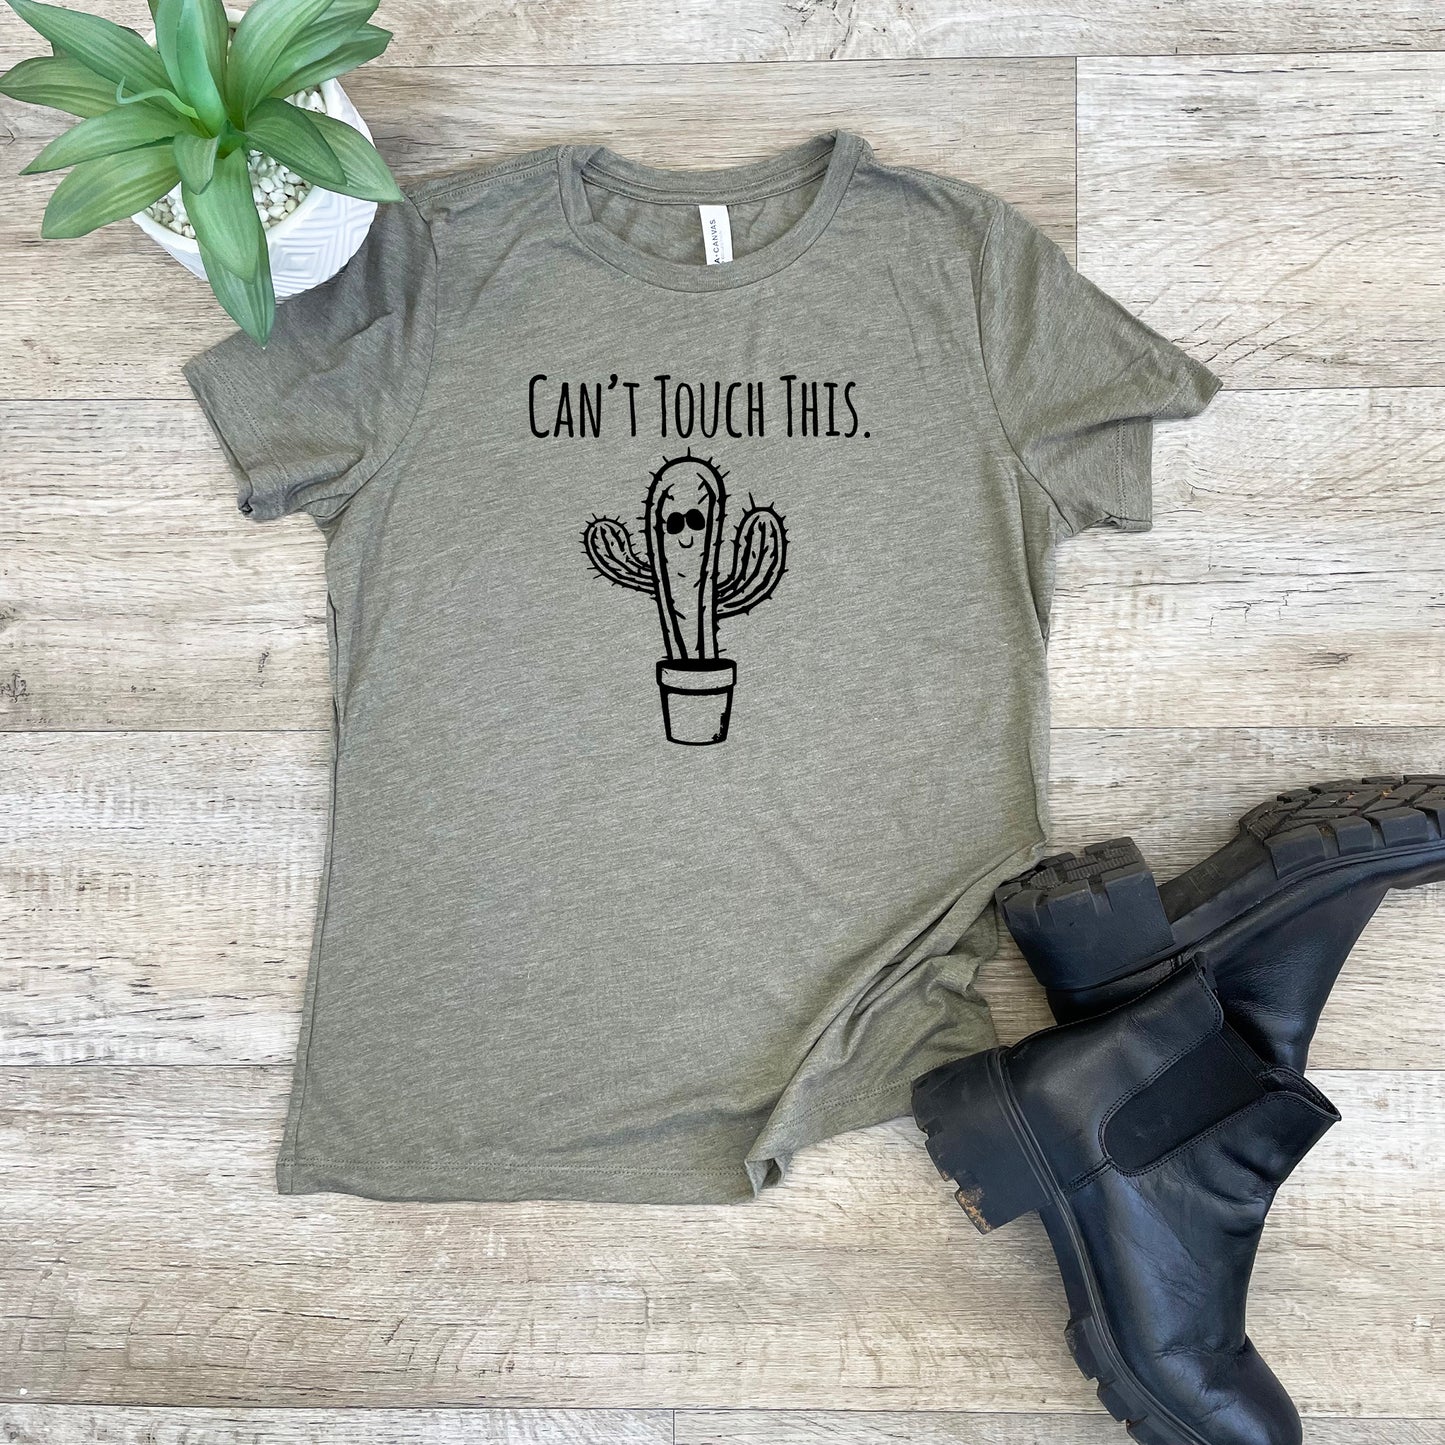 Can't Touch This (Cactus) - Women's Crew Tee - Olive or Dusty Blue